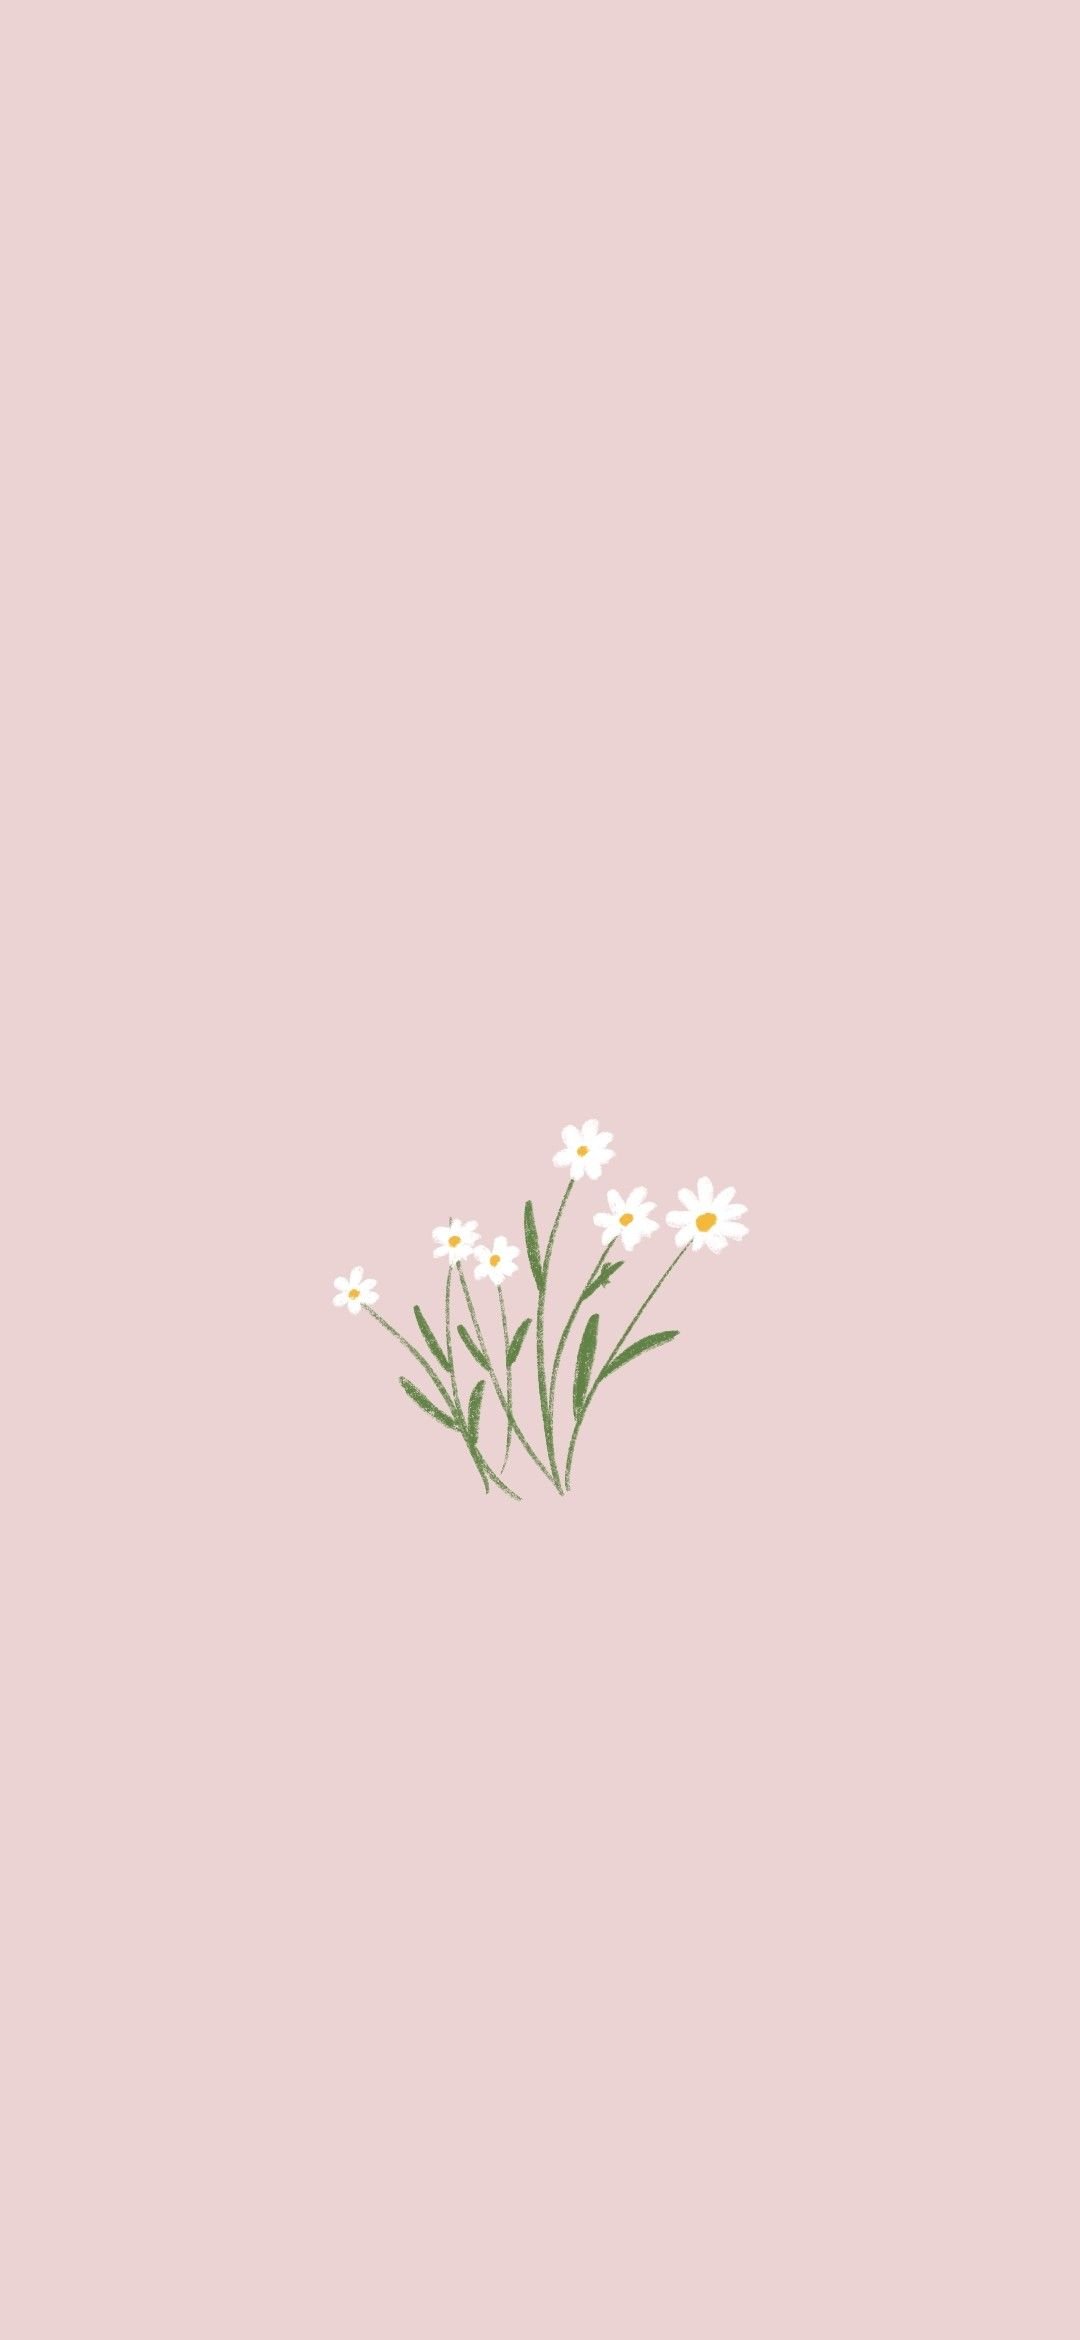 Aesthetic Flowers Wallpaper Download | MobCup